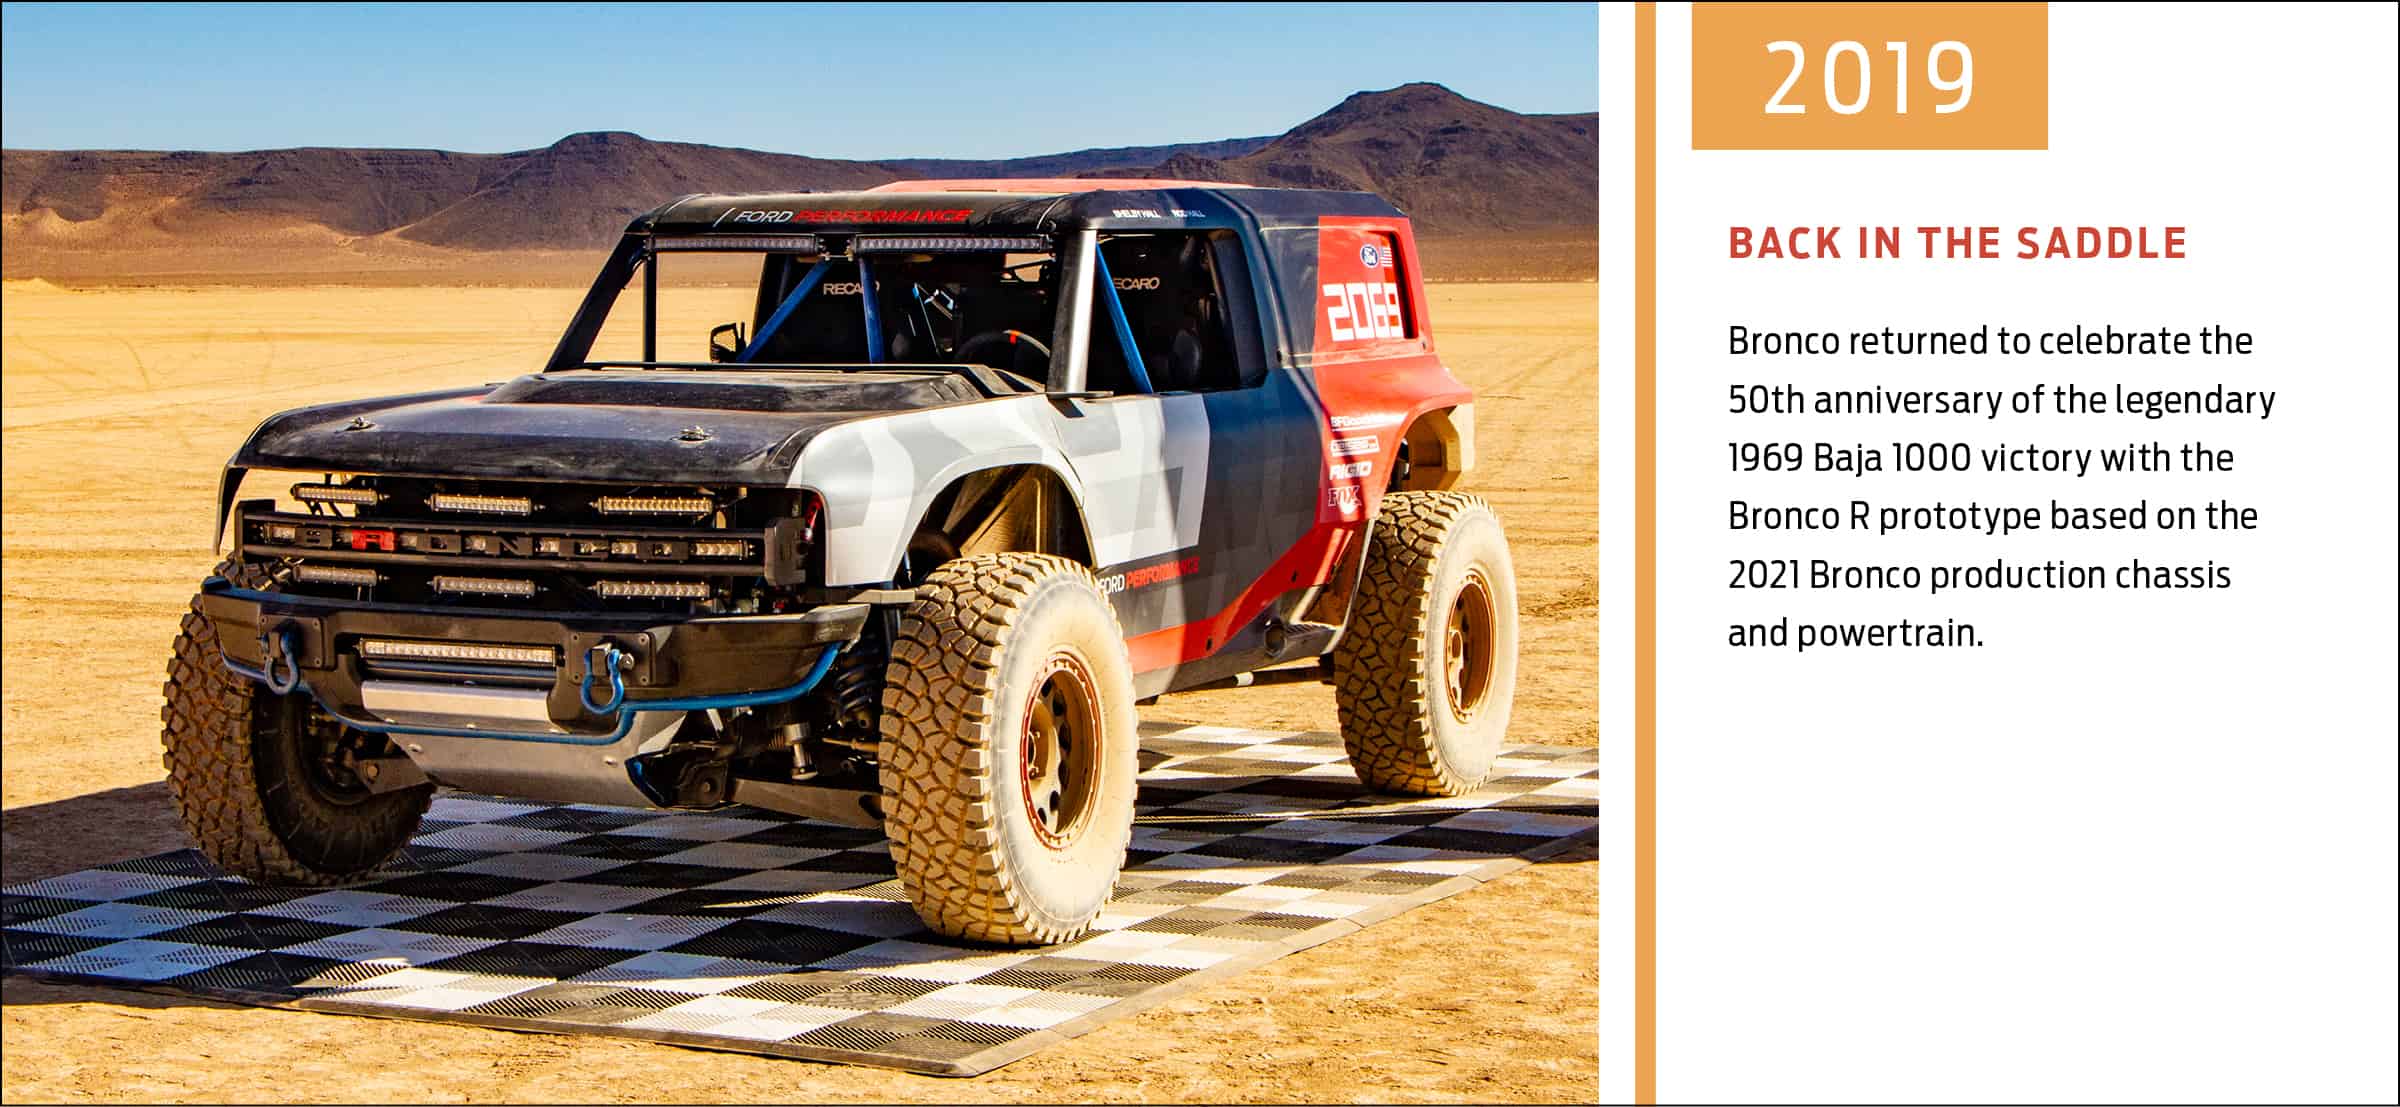 Bronco history, Bronco history displayed in Ford infographic, ClassicCars.com Journal